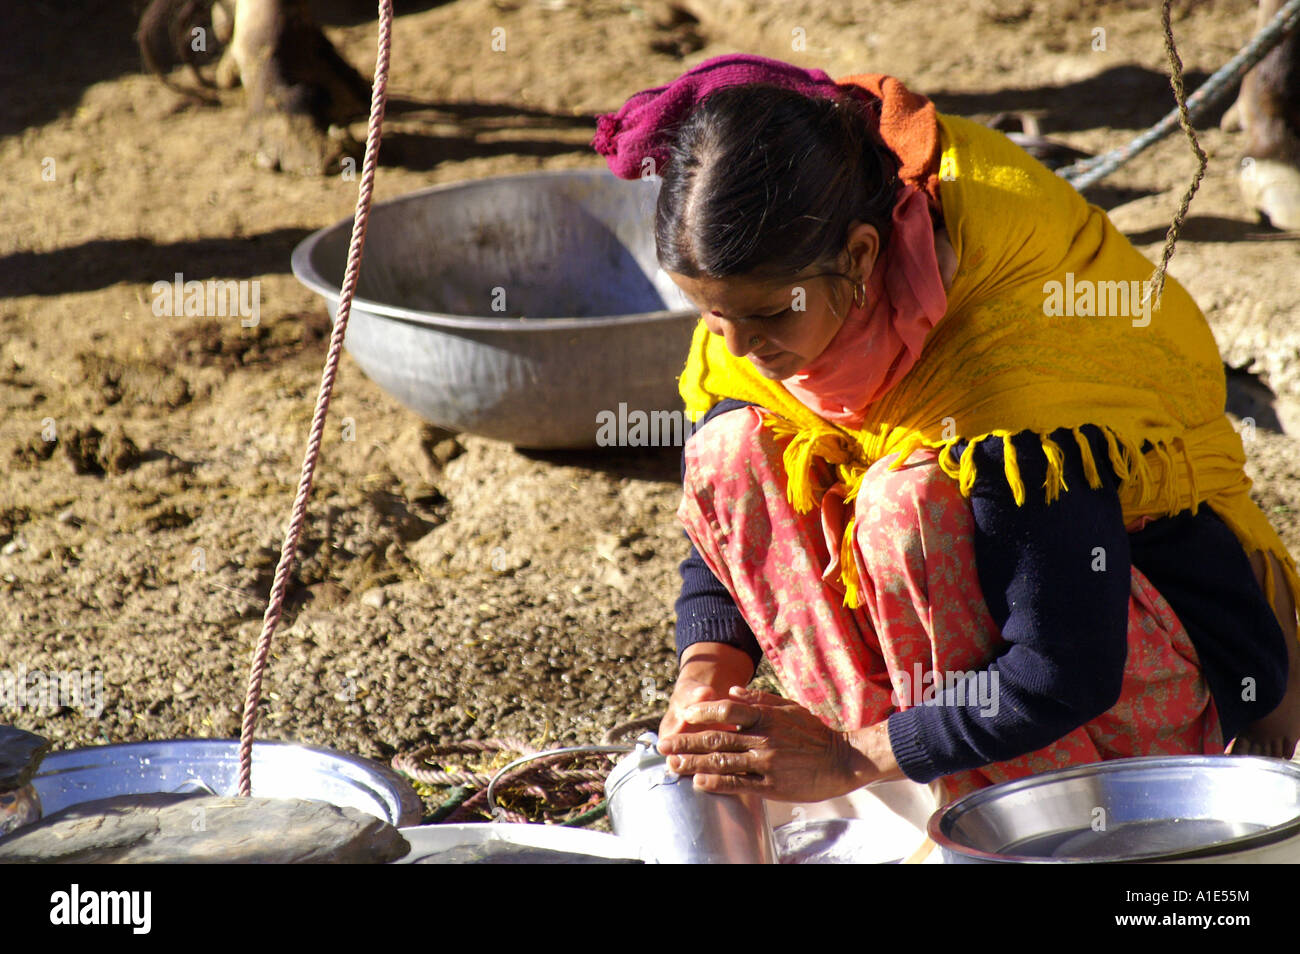 Young native indian woman washing dishes in front of her cow at at house yard, Bhagsunag village, India Stock Photo